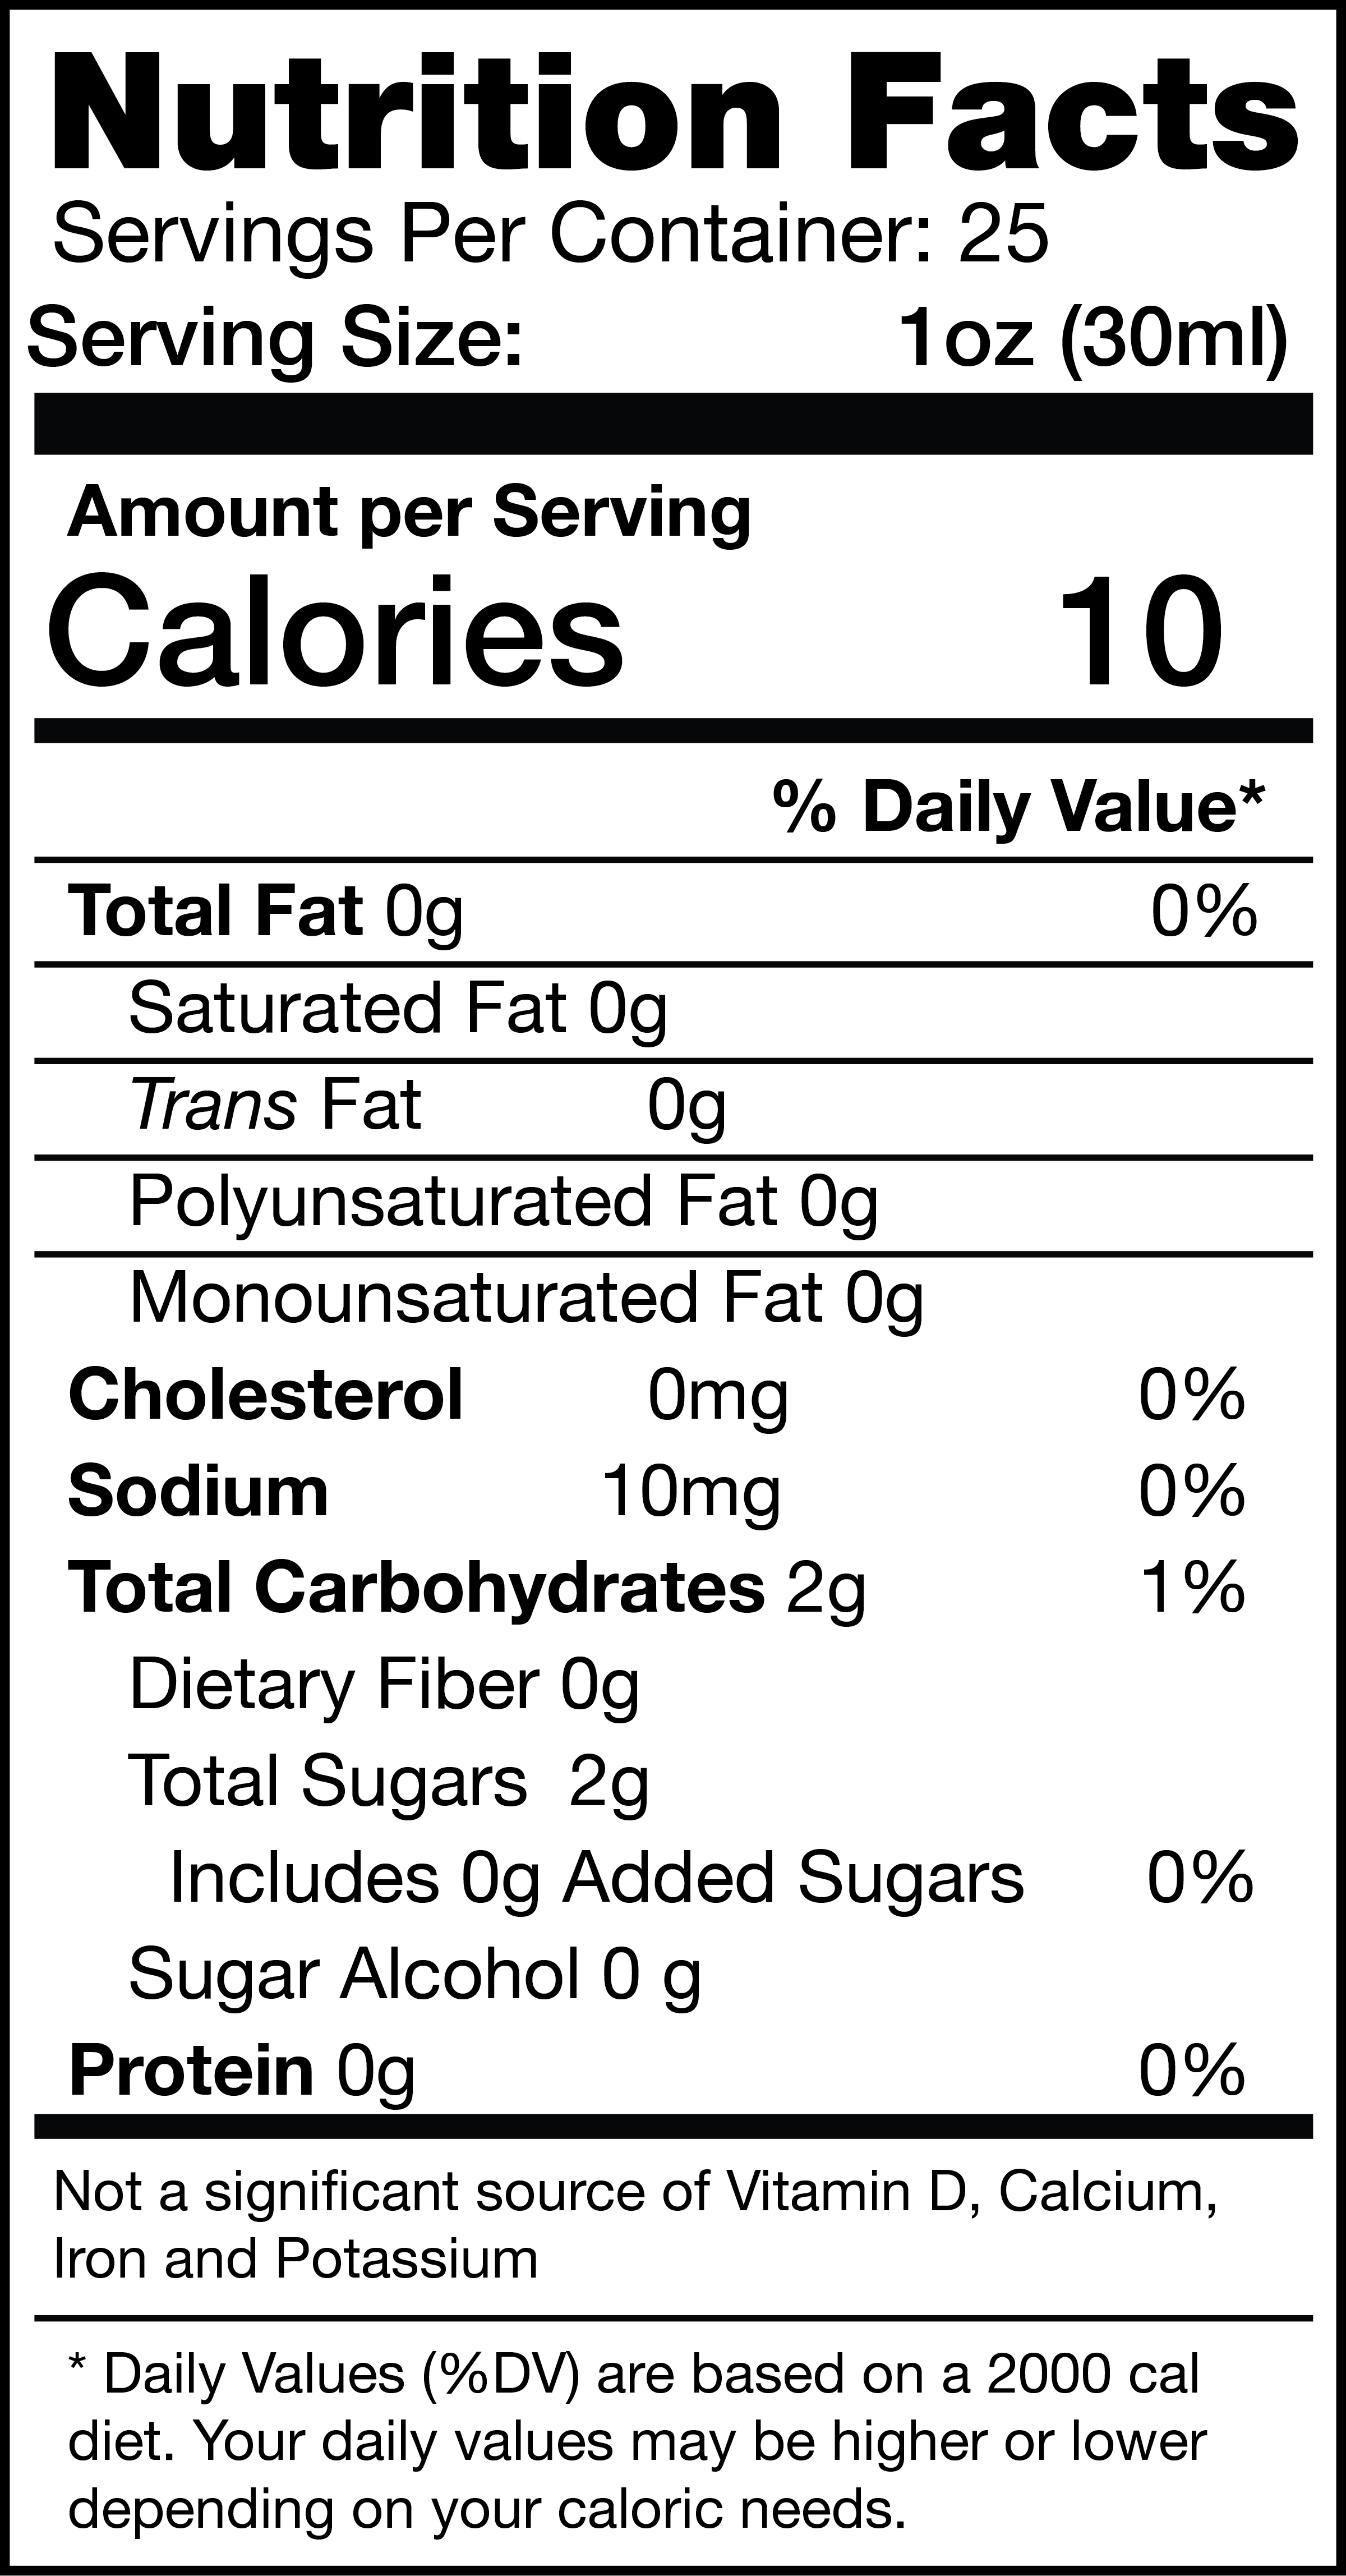 Factor Divina nutrition facts